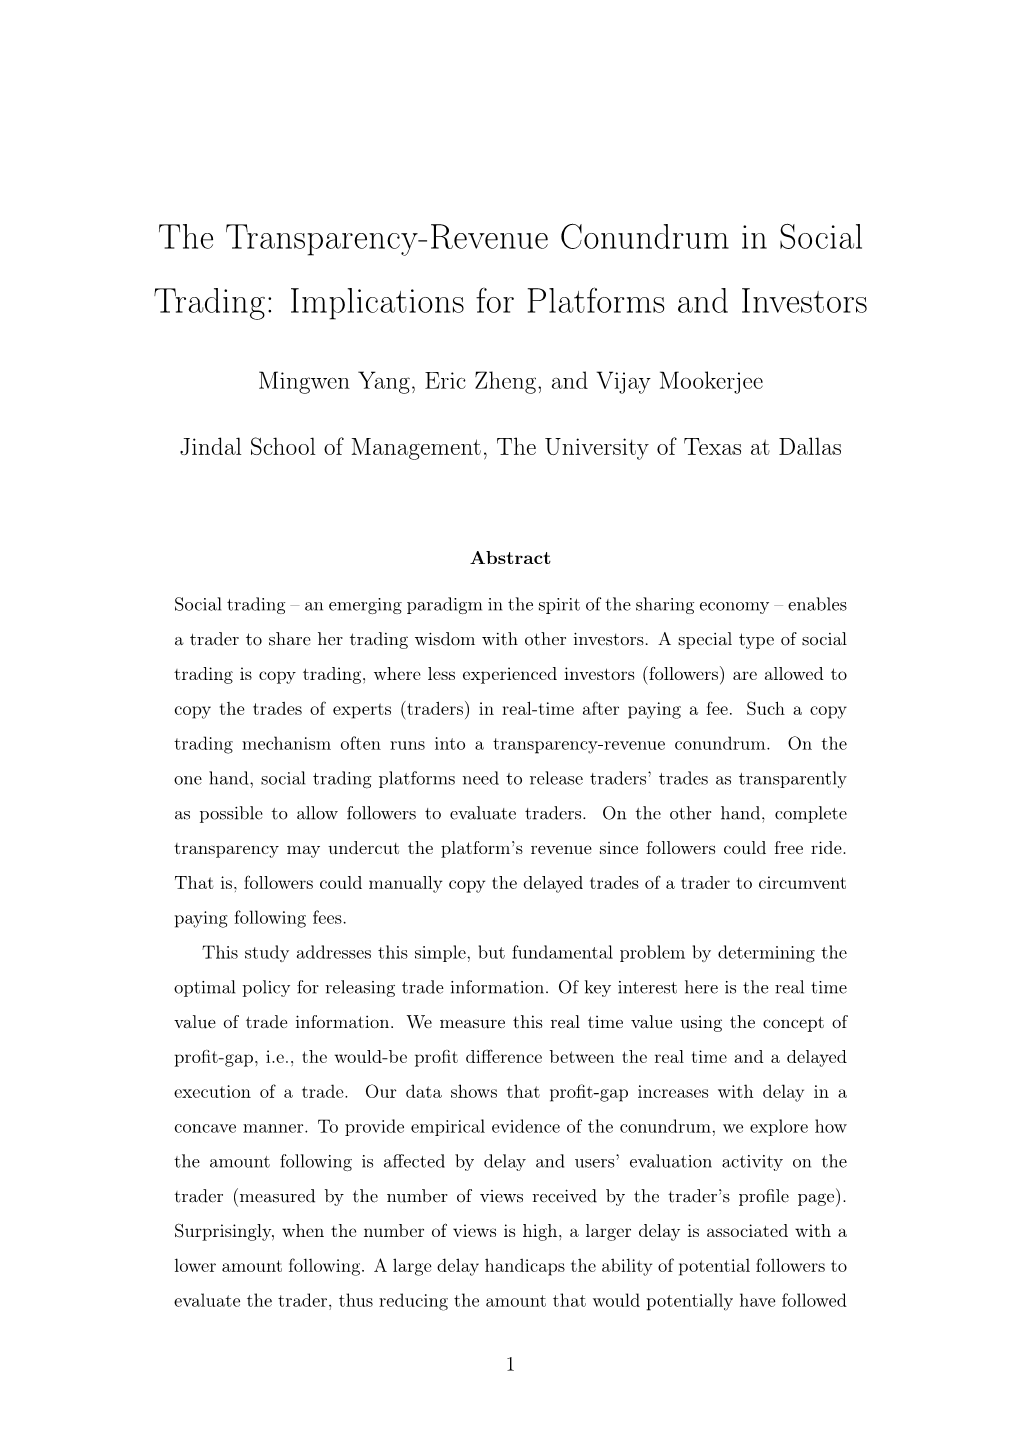 The Transparency-Revenue Conundrum in Social Trading: Implications for Platforms and Investors